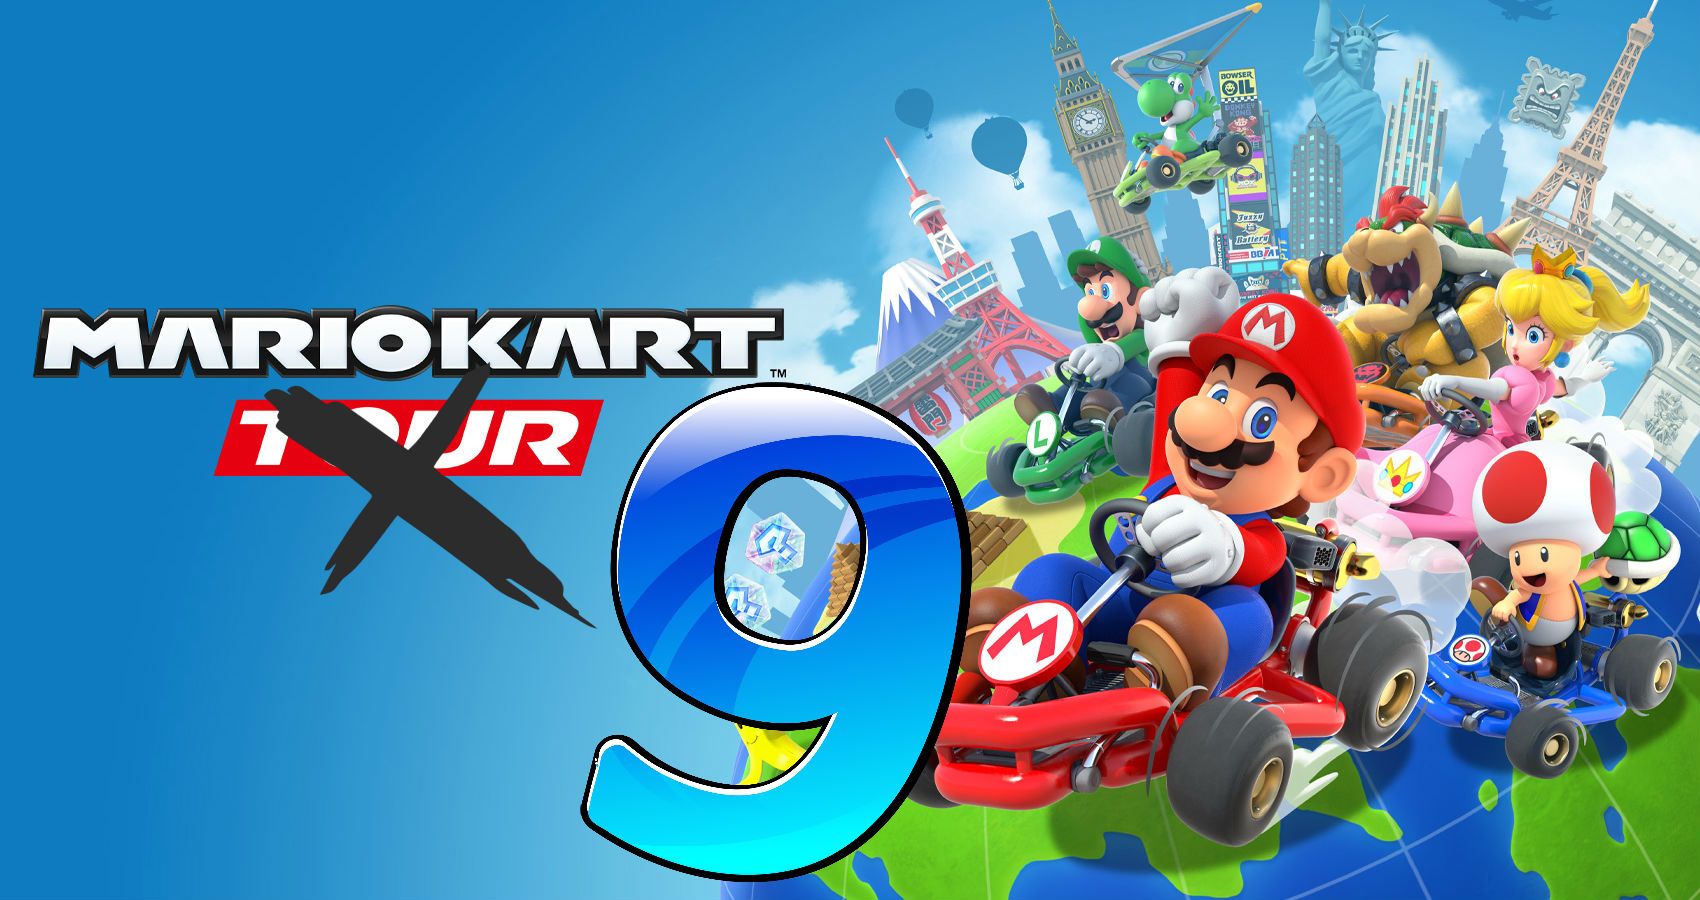 is there going to be a mario kart 9